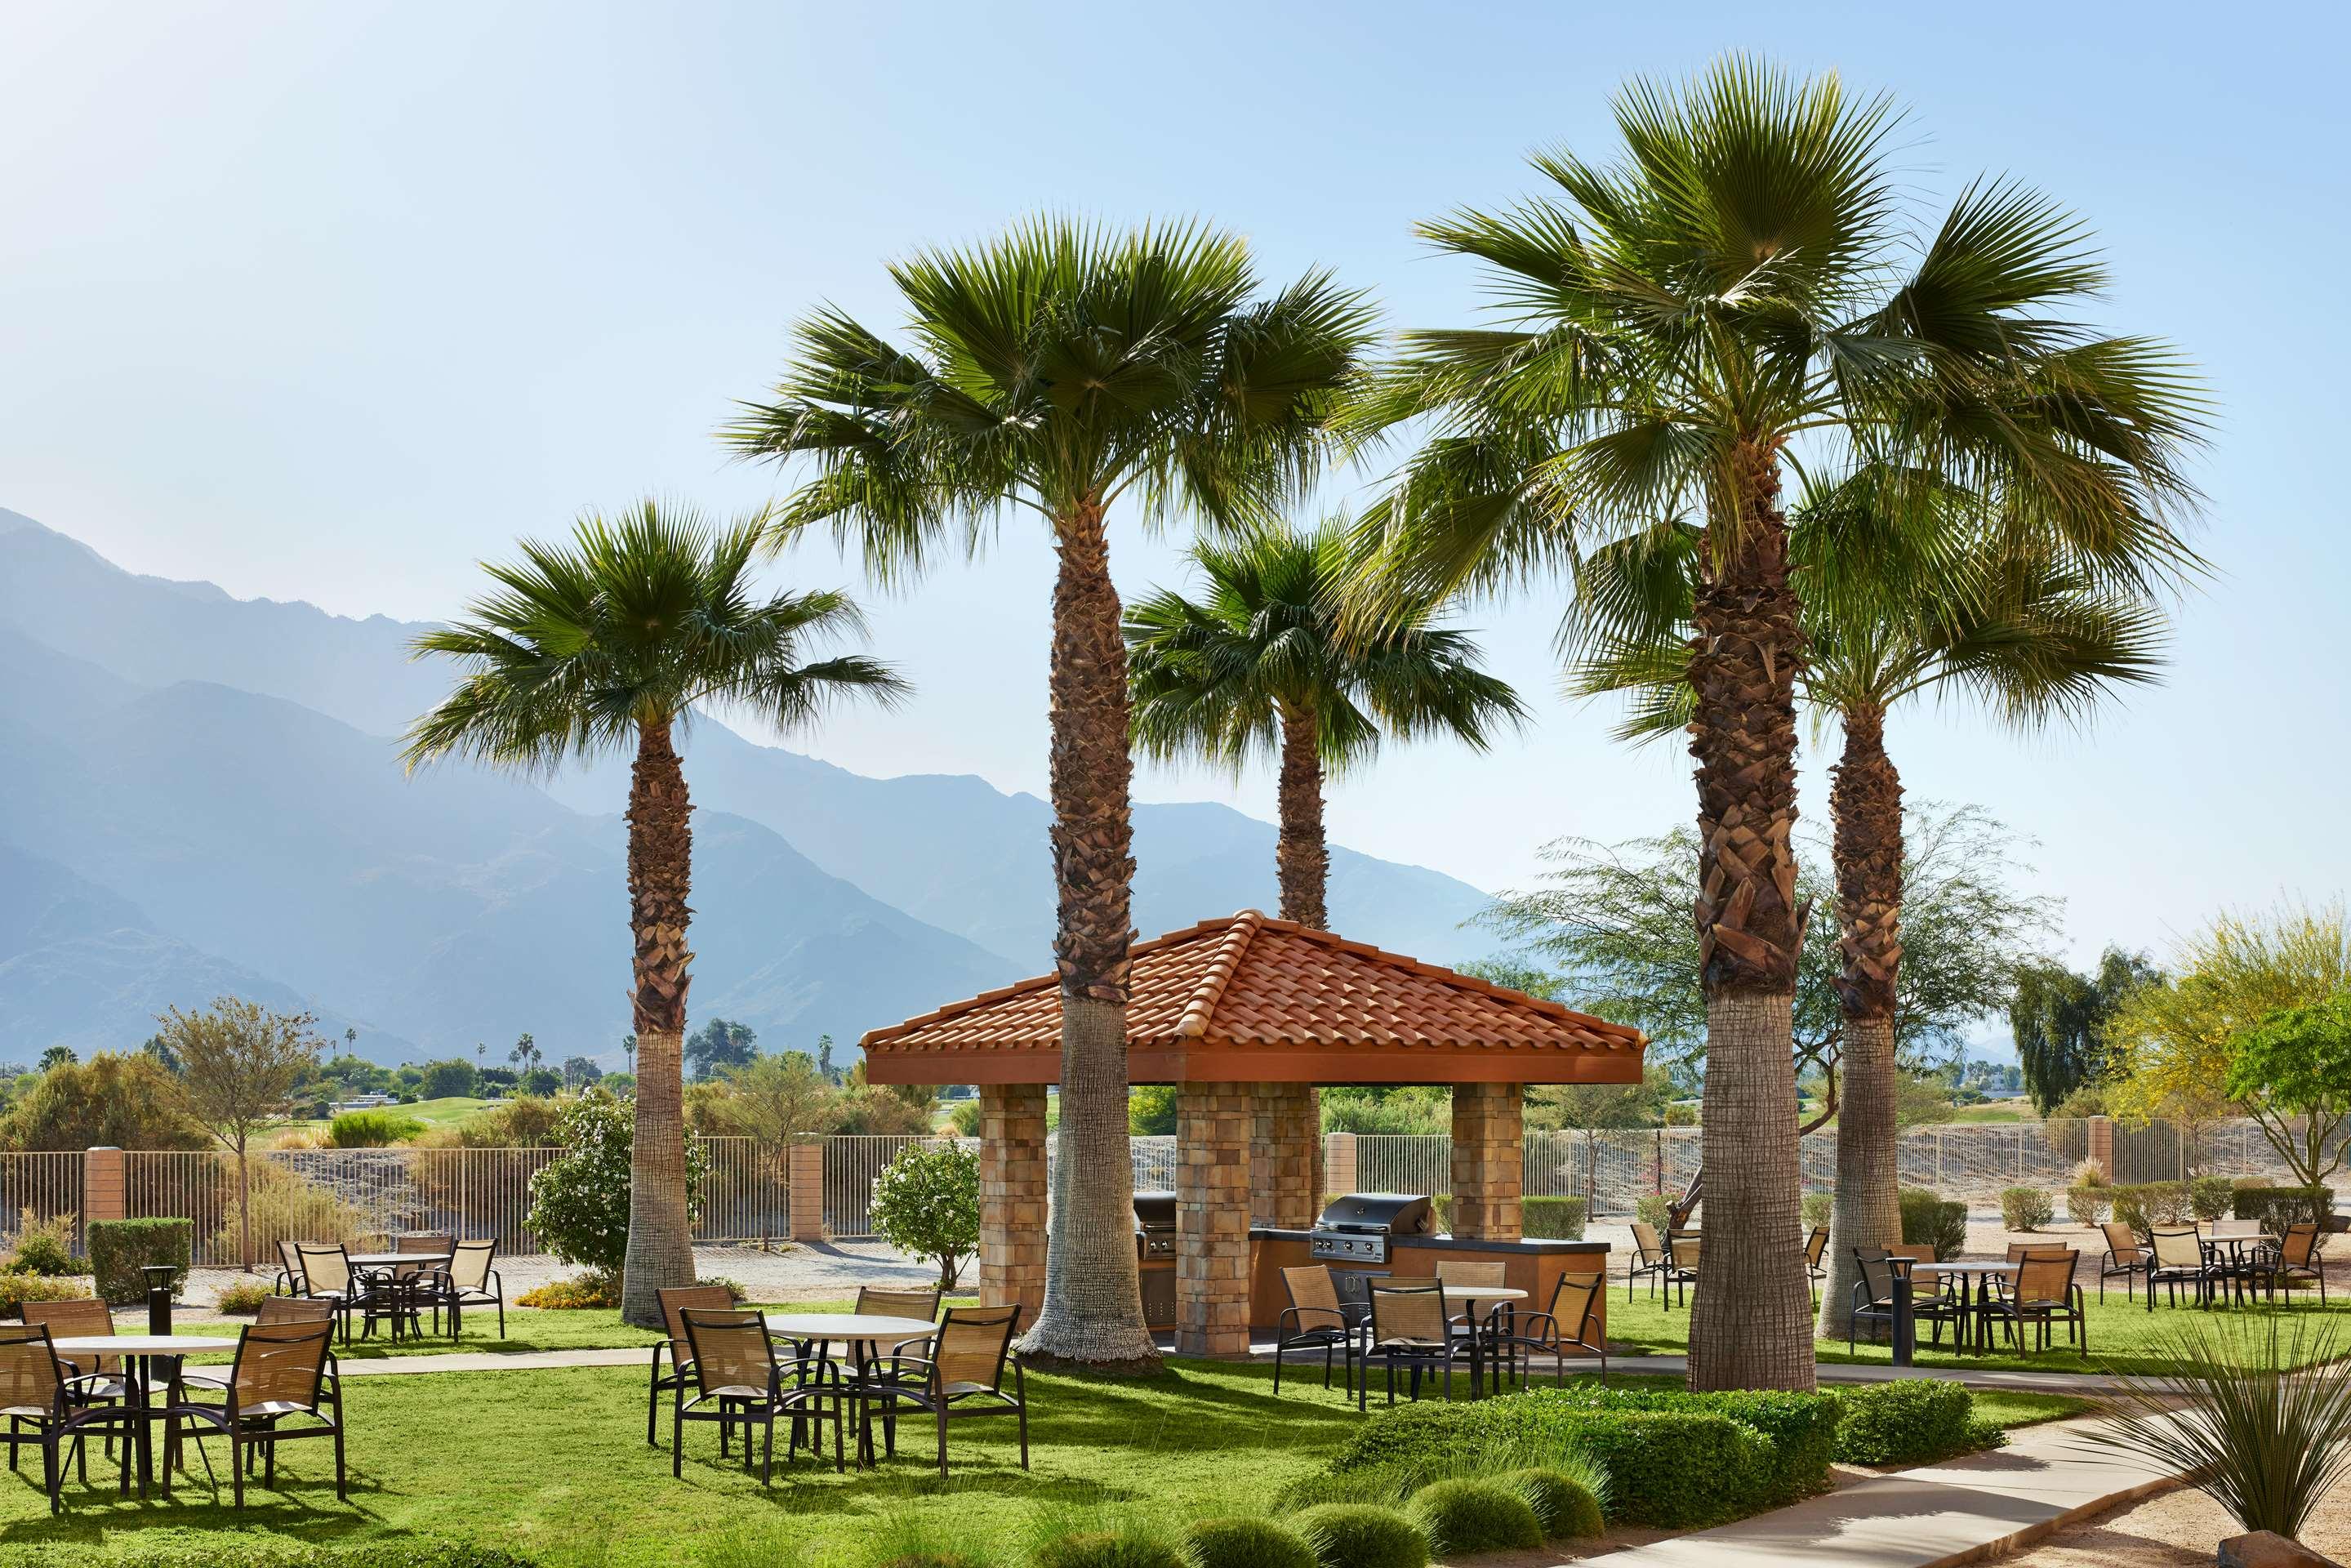 16 Best Hotels in Indian Wells. Hotels from C$ 145/night - KAYAK